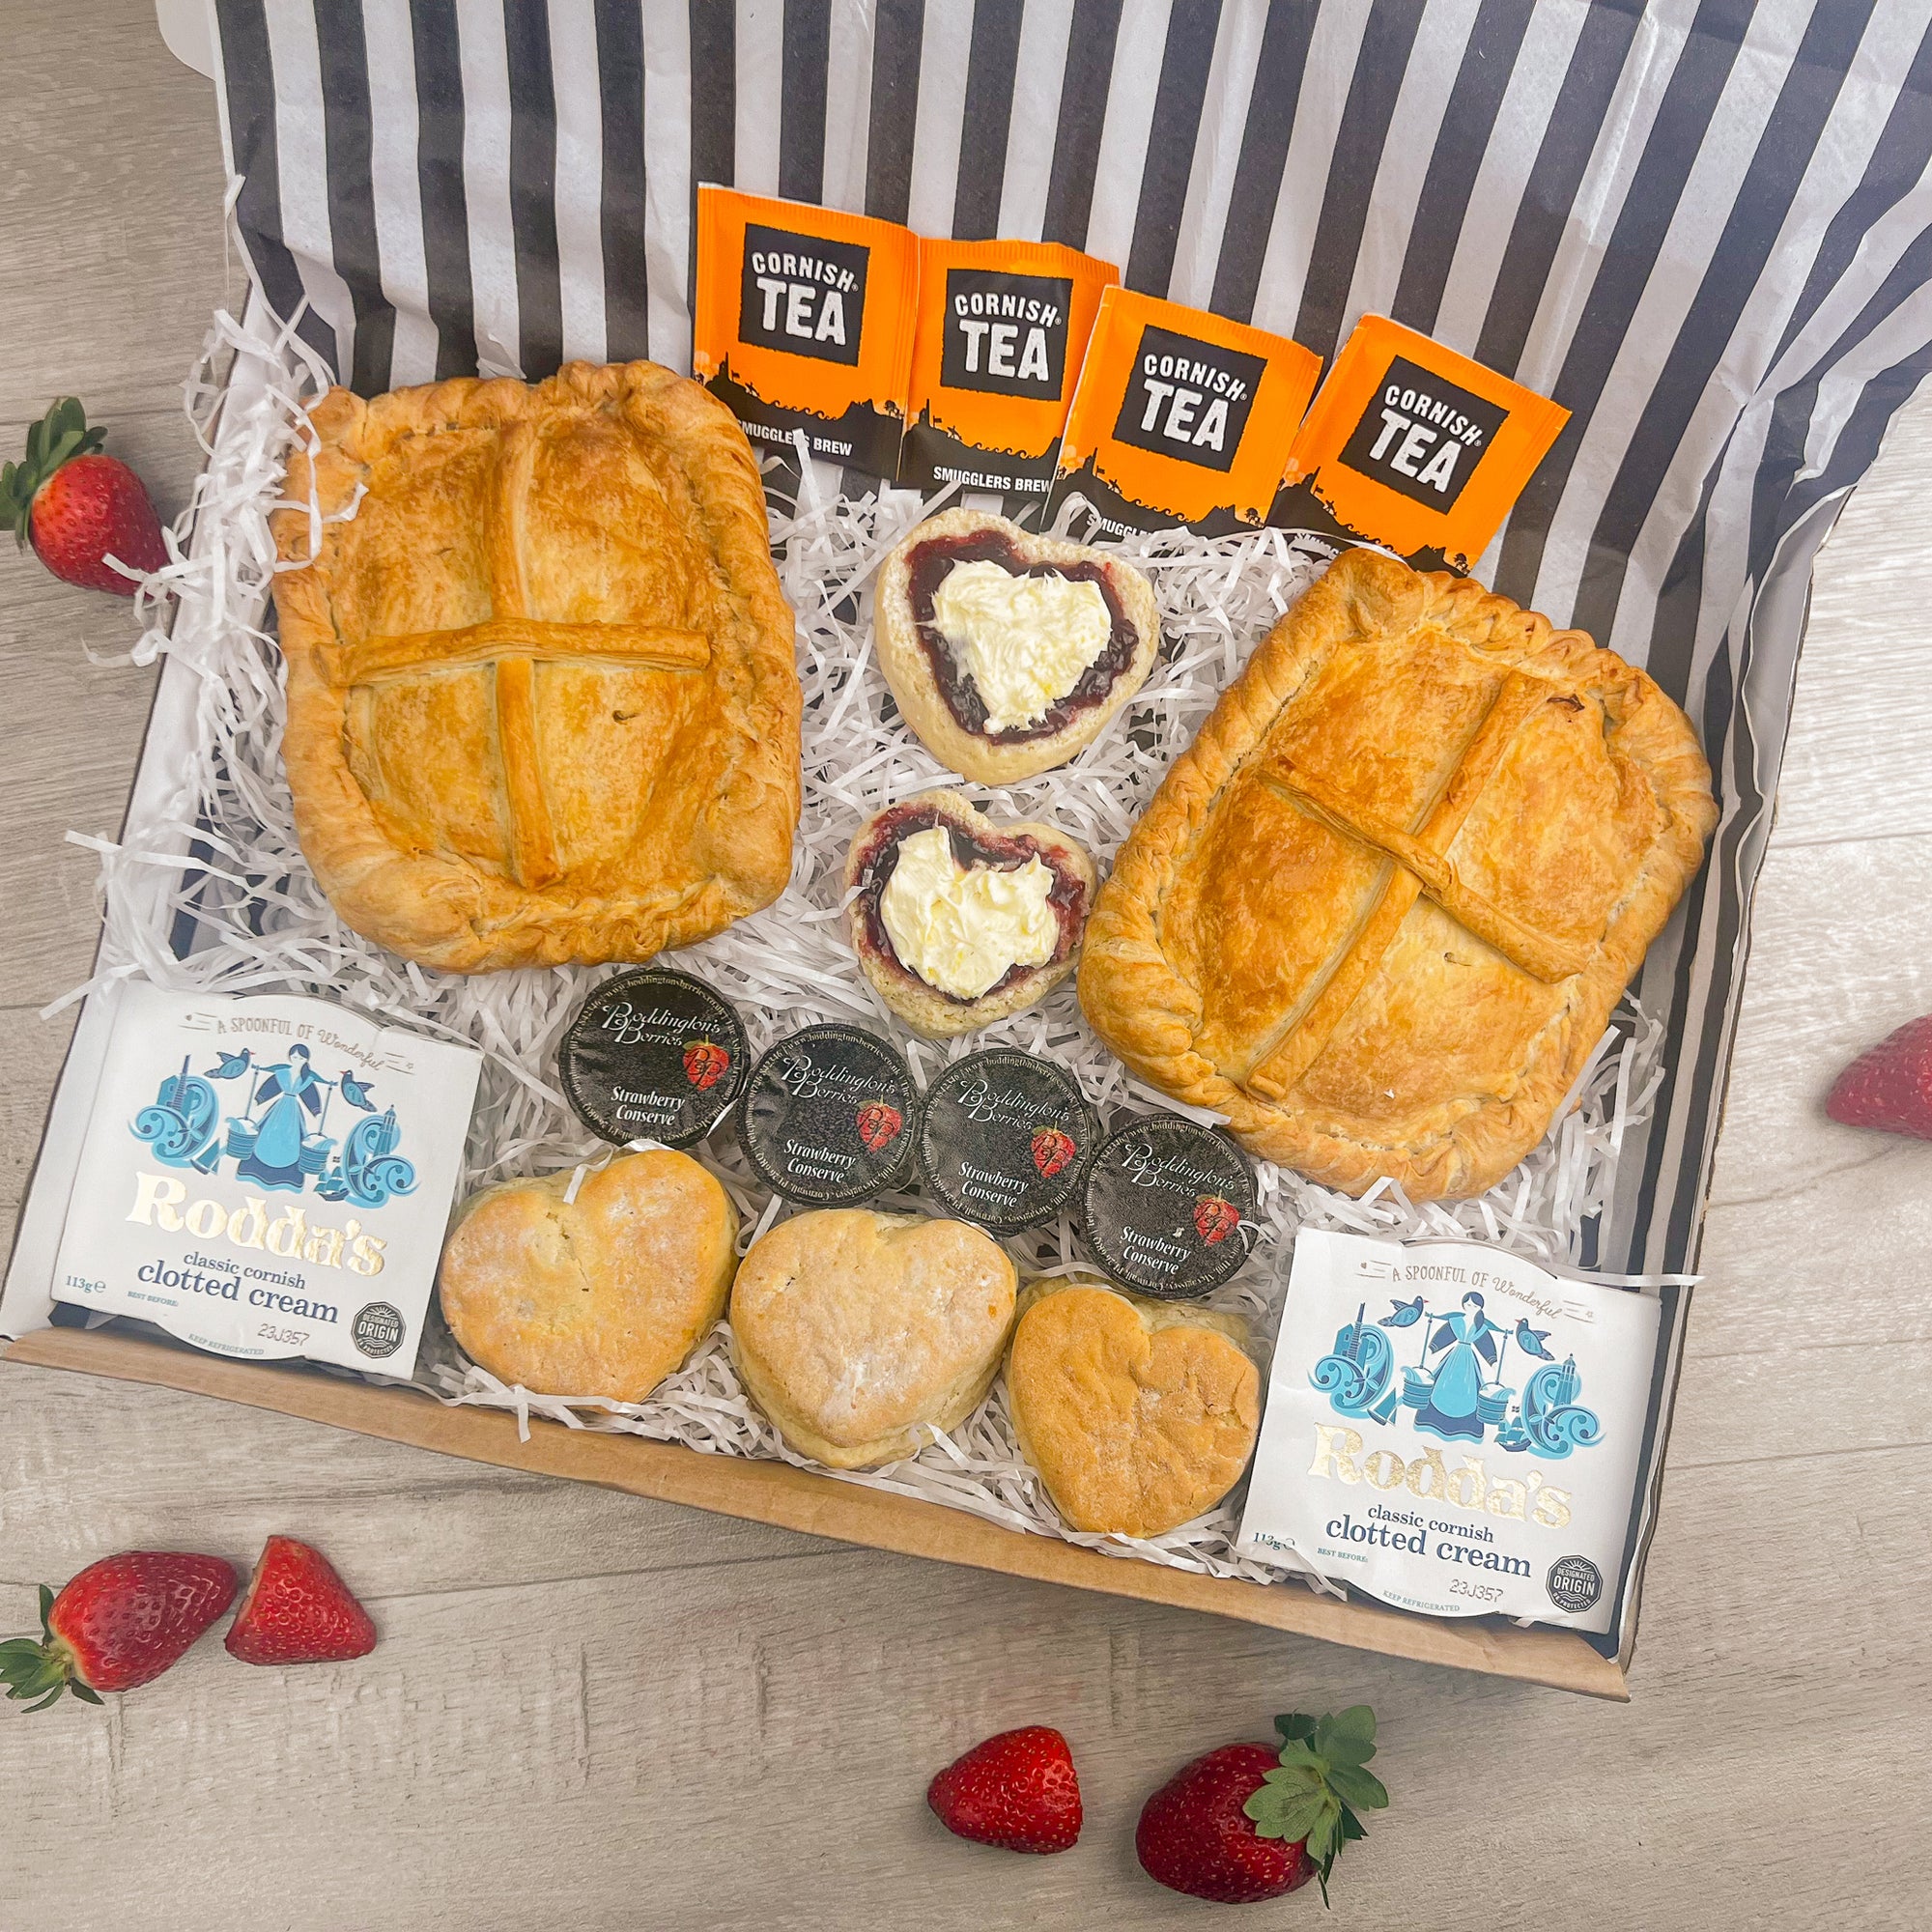 The Large St Piran's Day Pasty and Cream Tea Box